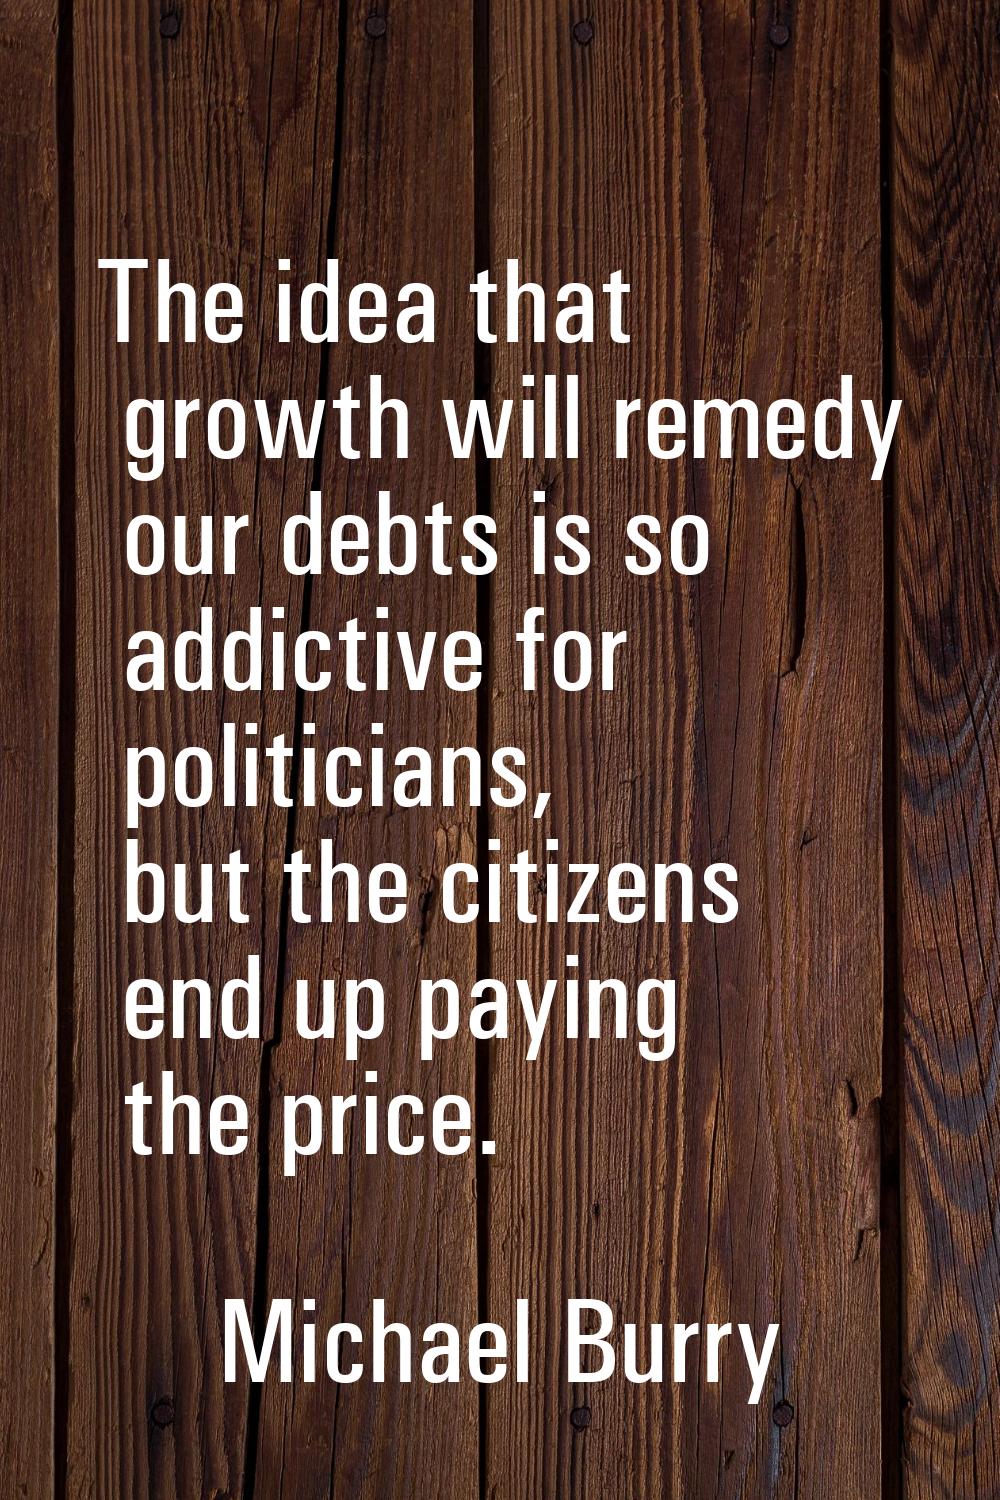 The idea that growth will remedy our debts is so addictive for politicians, but the citizens end up